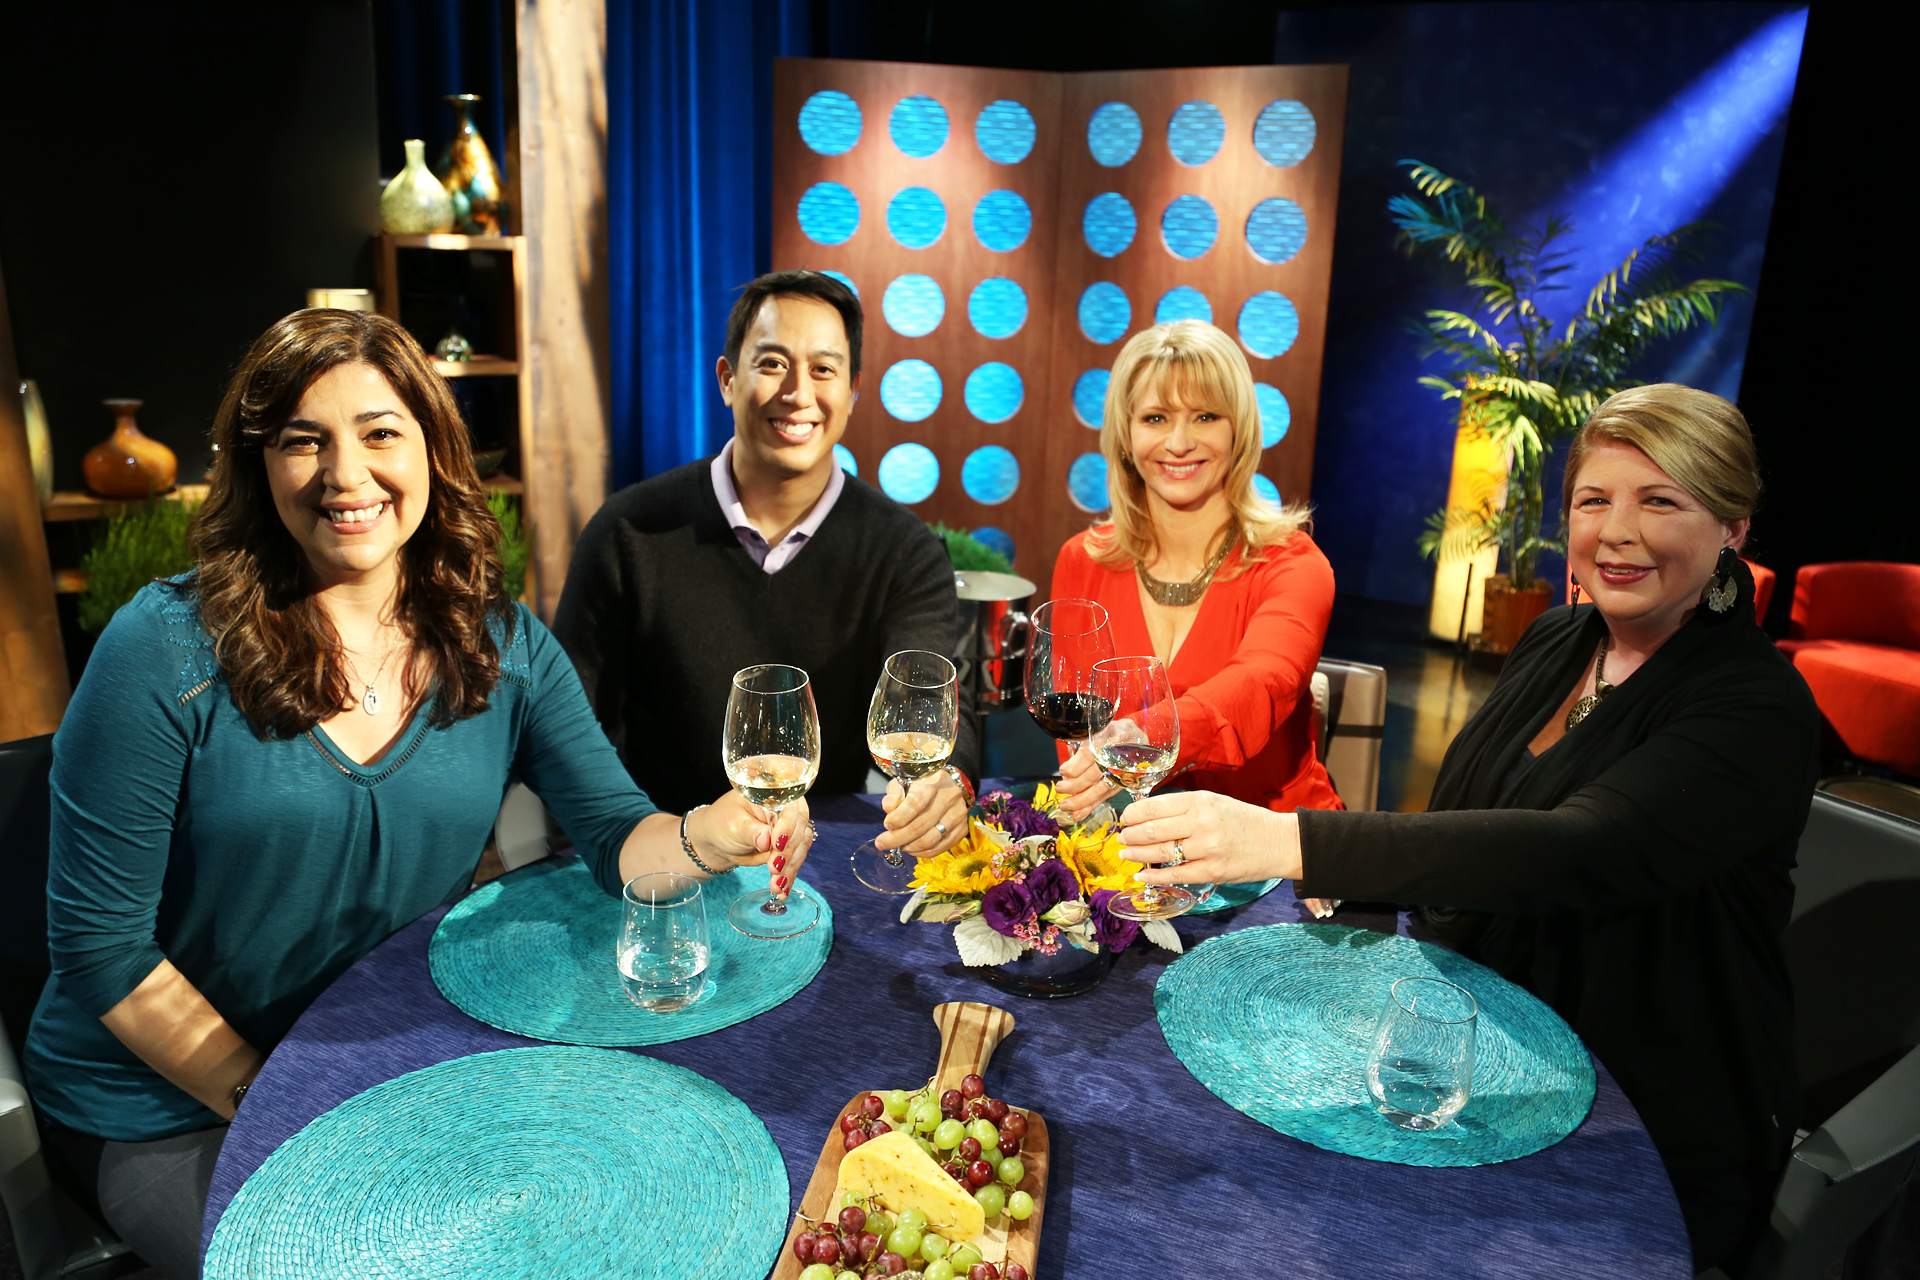 Host Leslie Sbrocco and guests on the set of the premiere episode of season 11.